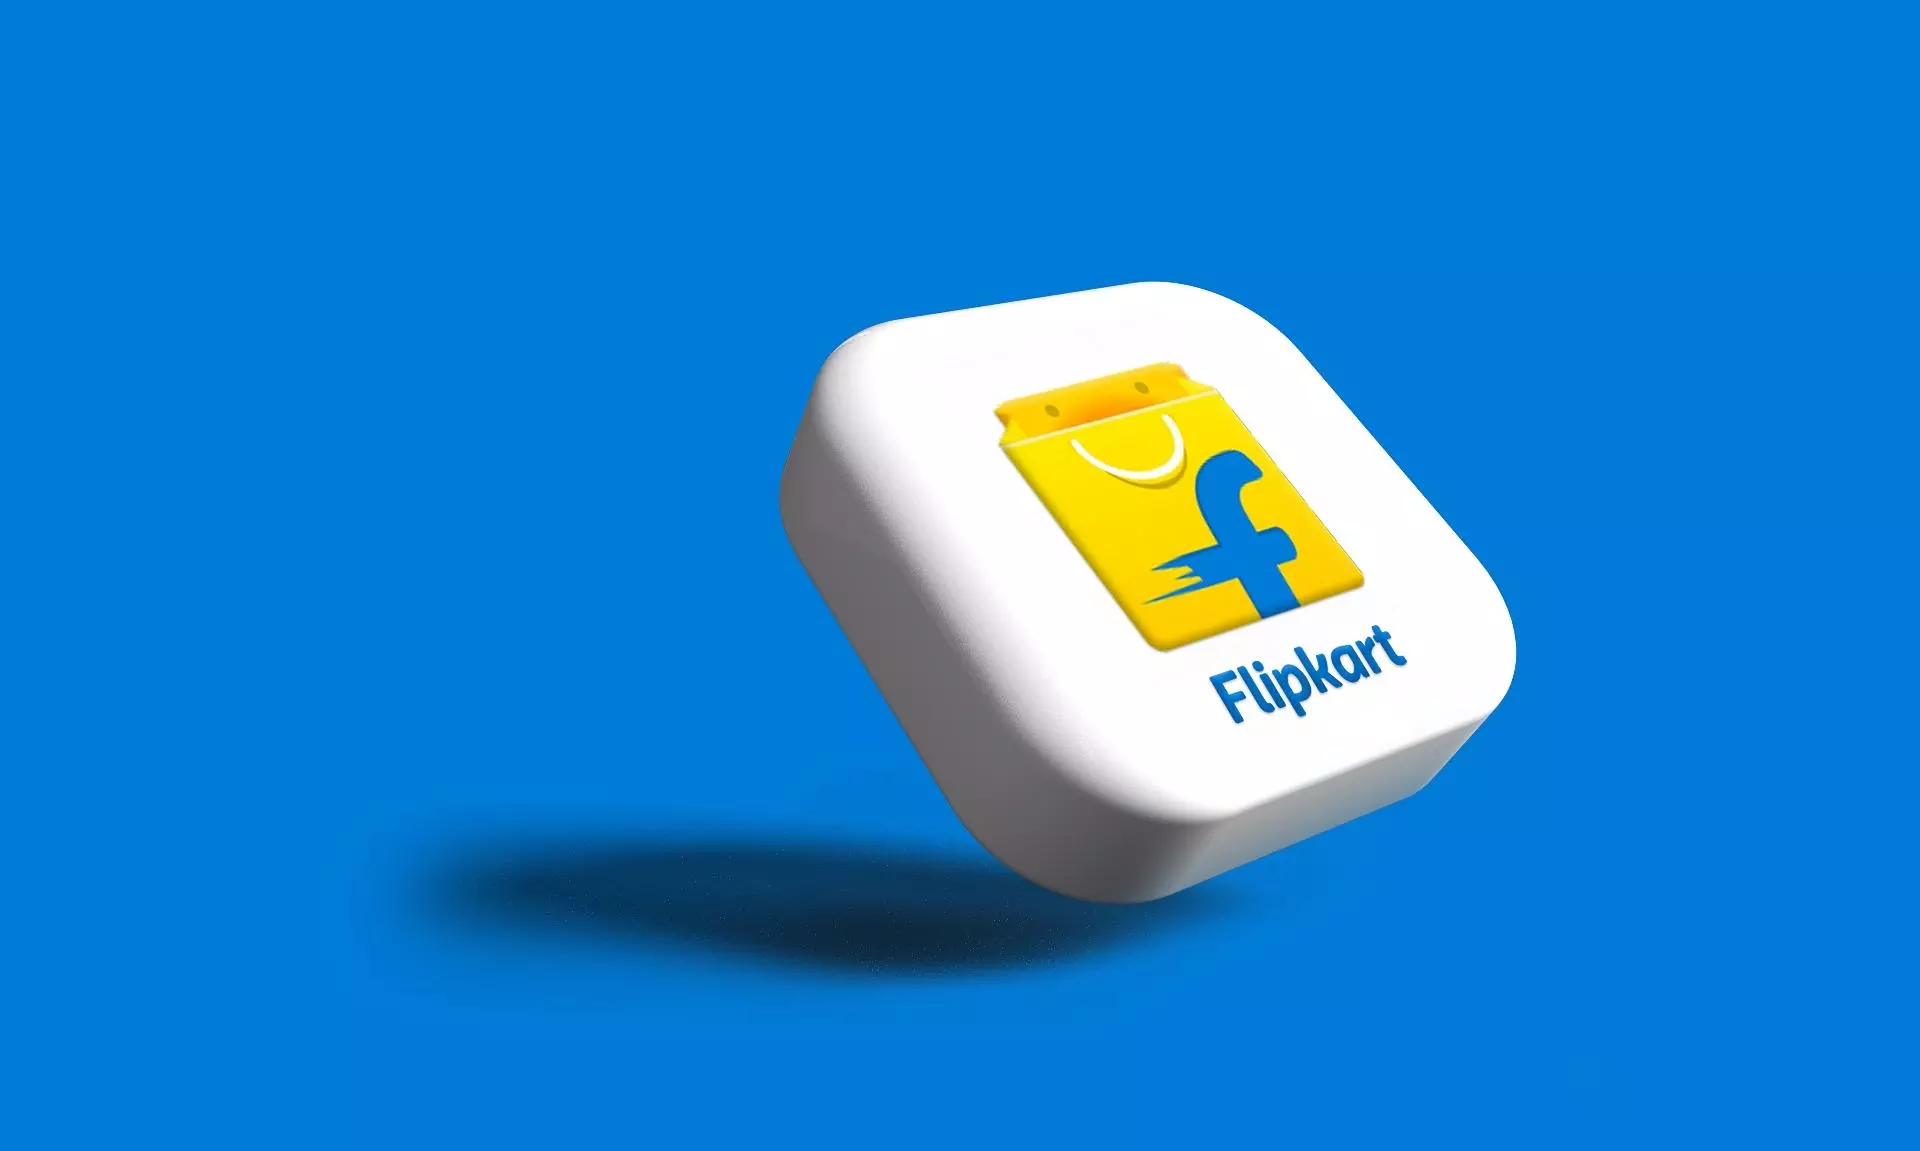 Read how Flipkart’s supply chain helps Indian sellers, MSMEs, artisans